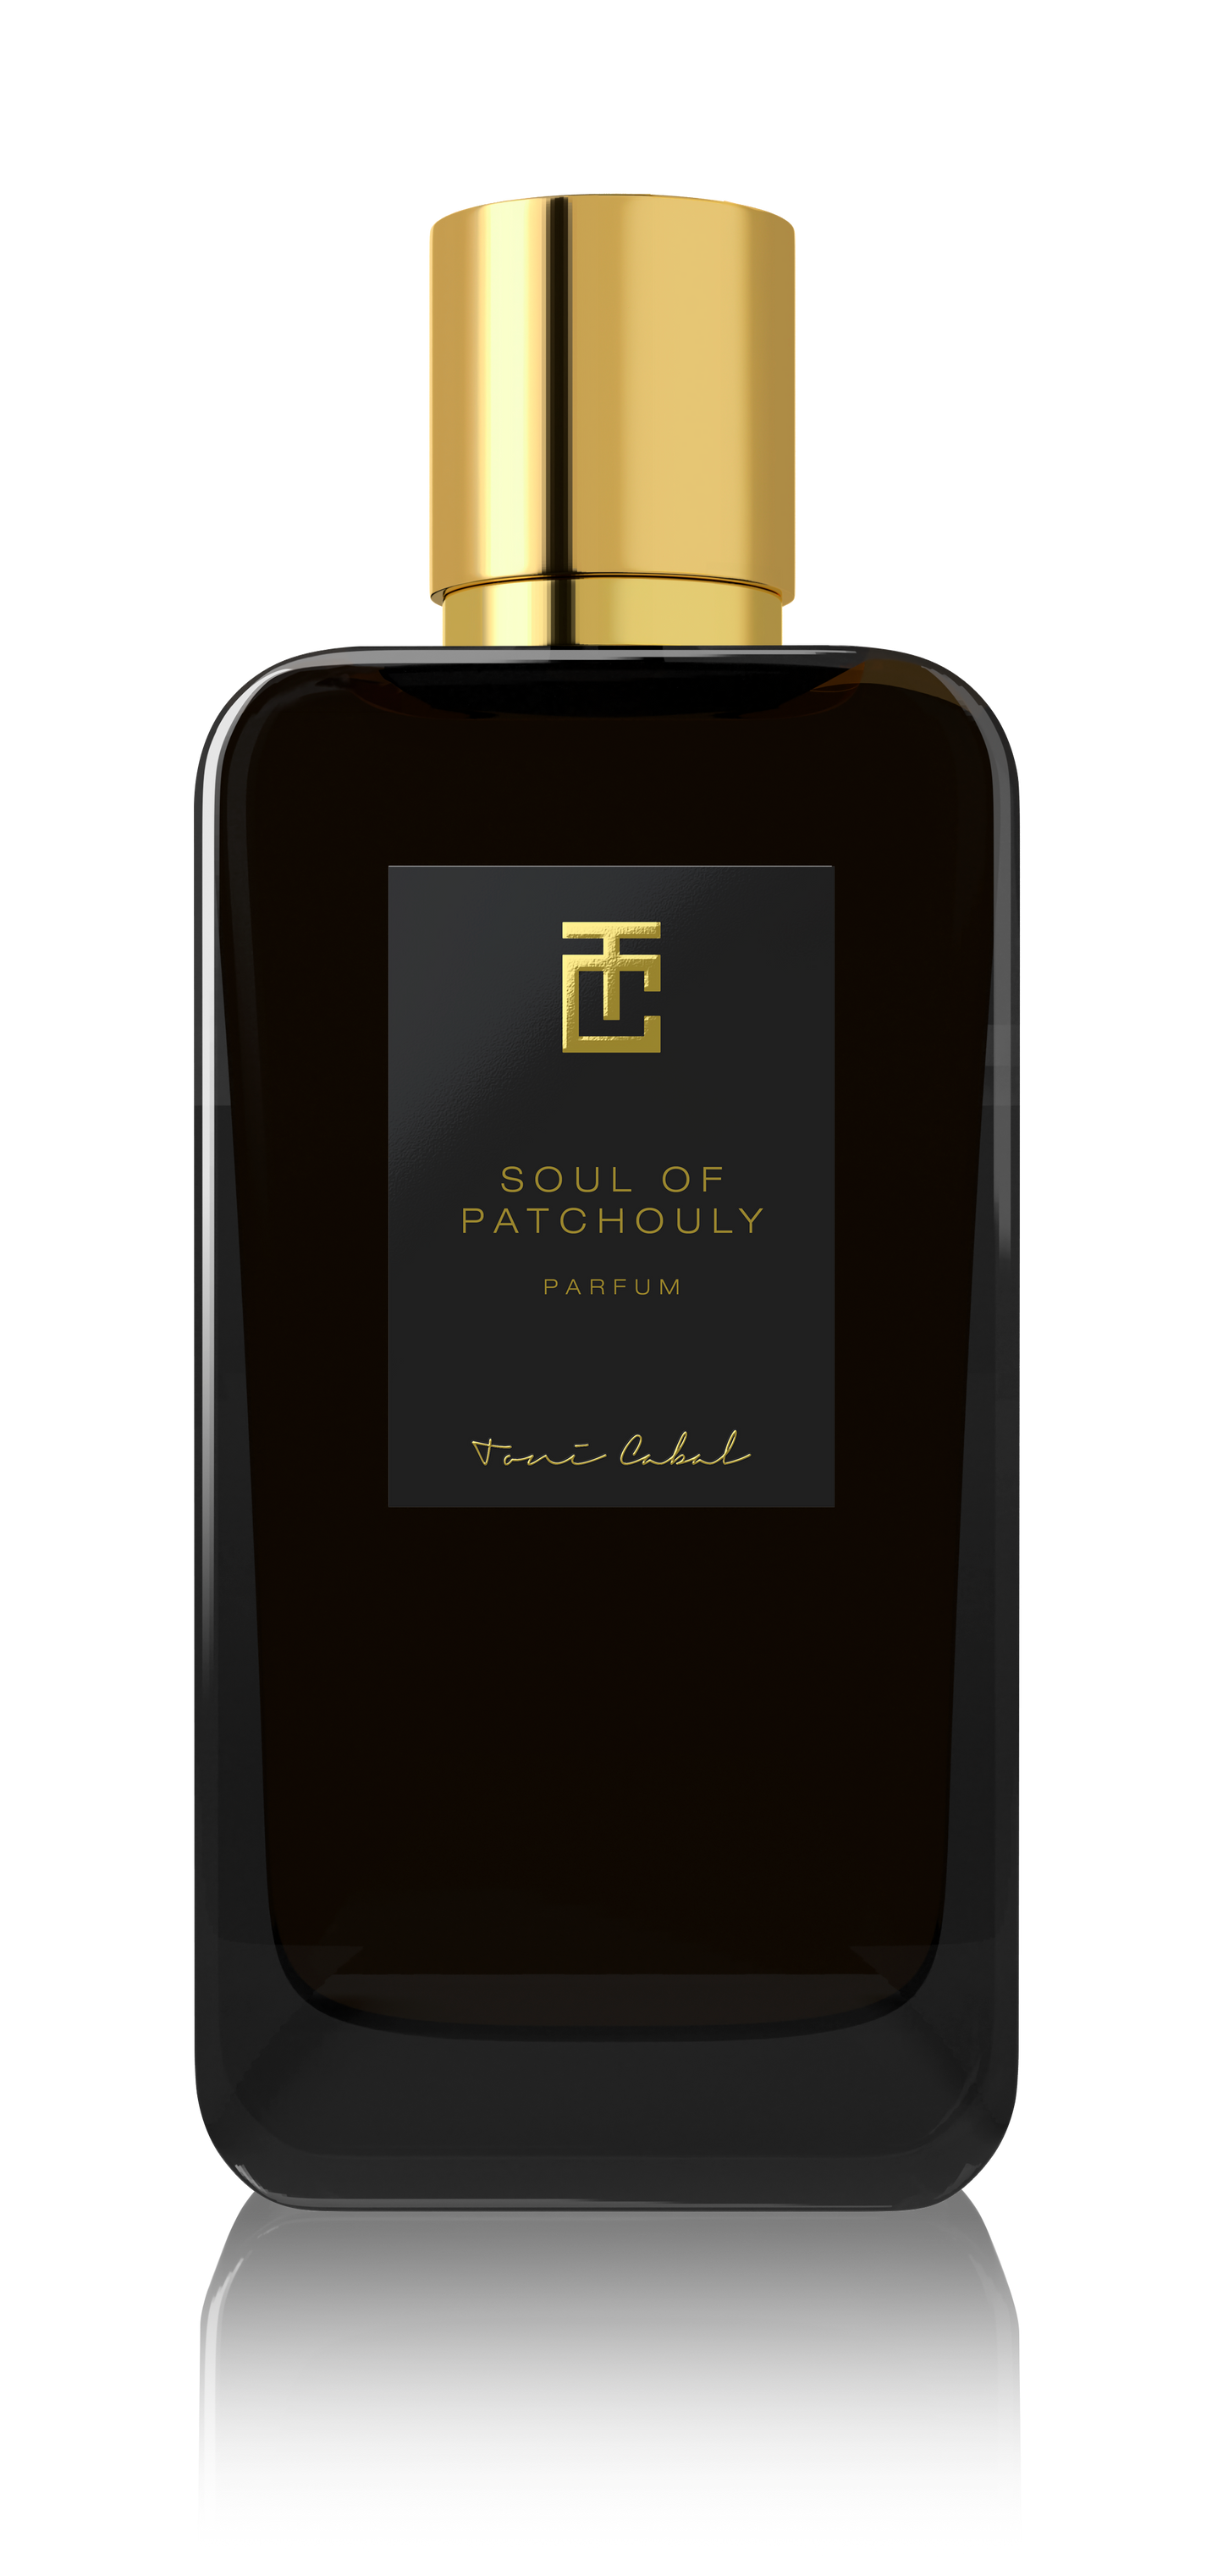 SOUL OF PATCHOULY – Toni Cabal